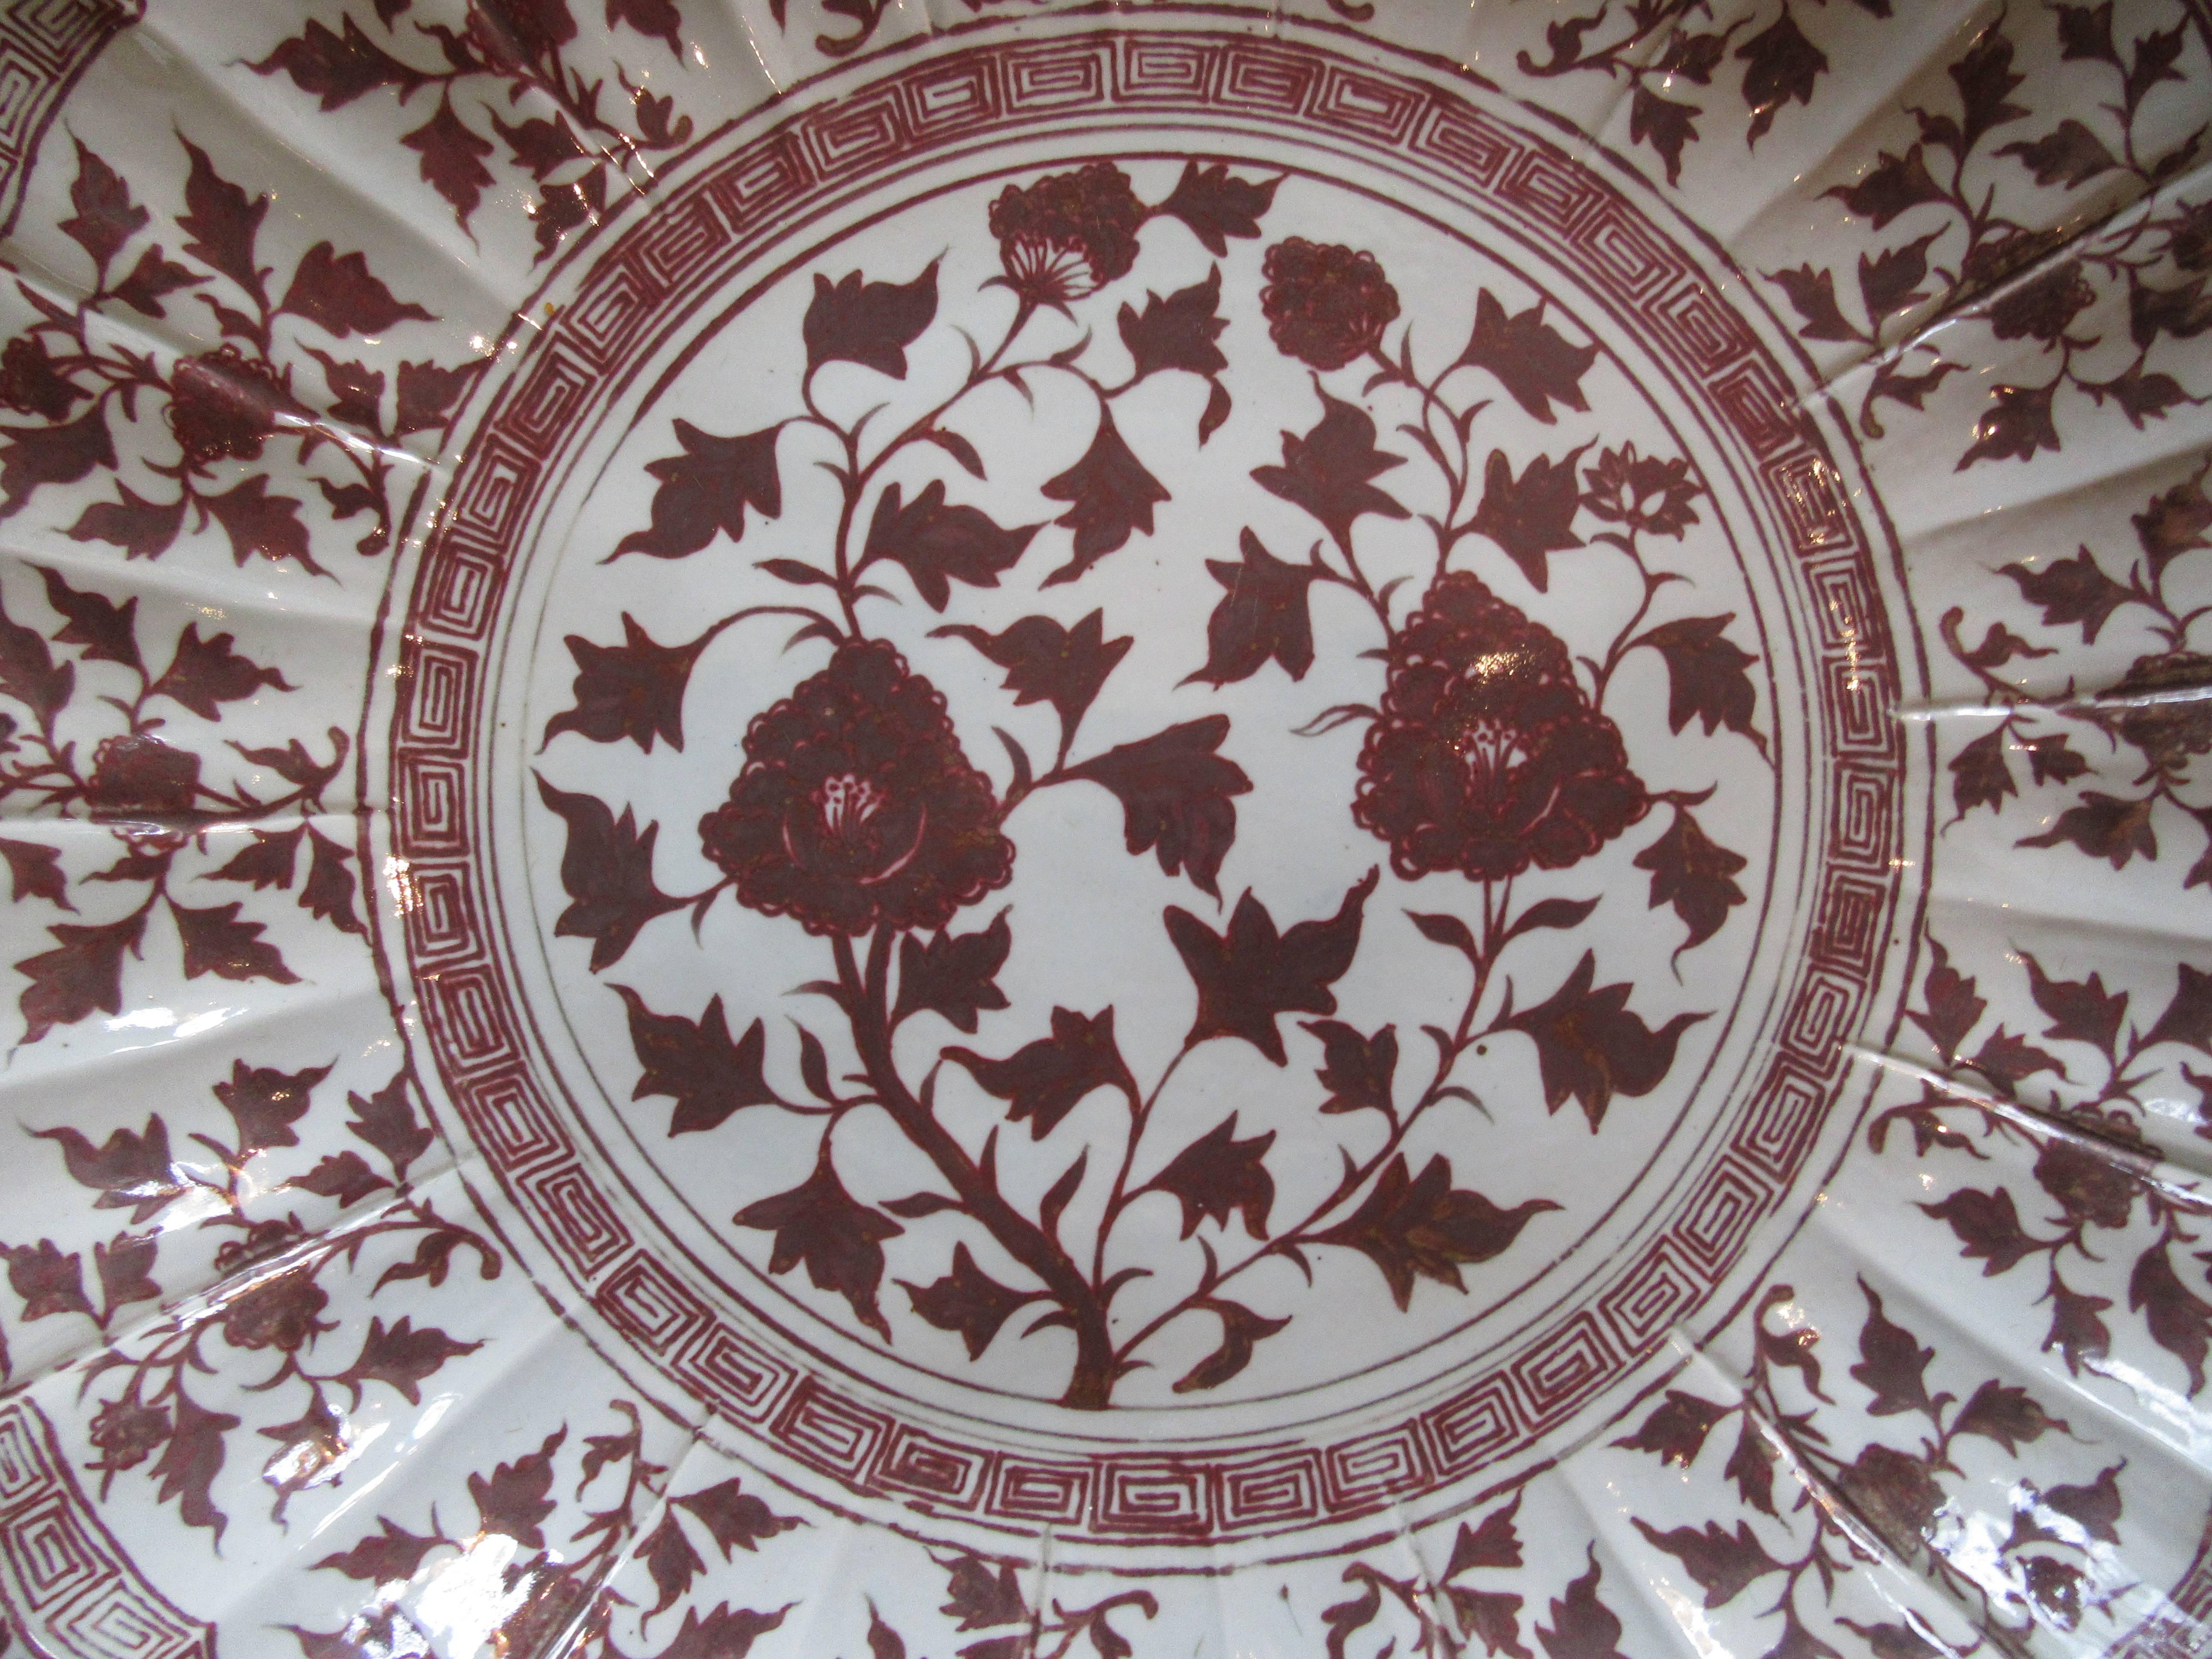 Monumental Chinese red and white porcelain charger hand-painted with a floral motif. This impressive piece is enhanced by a scalloped edge in the Ming style.